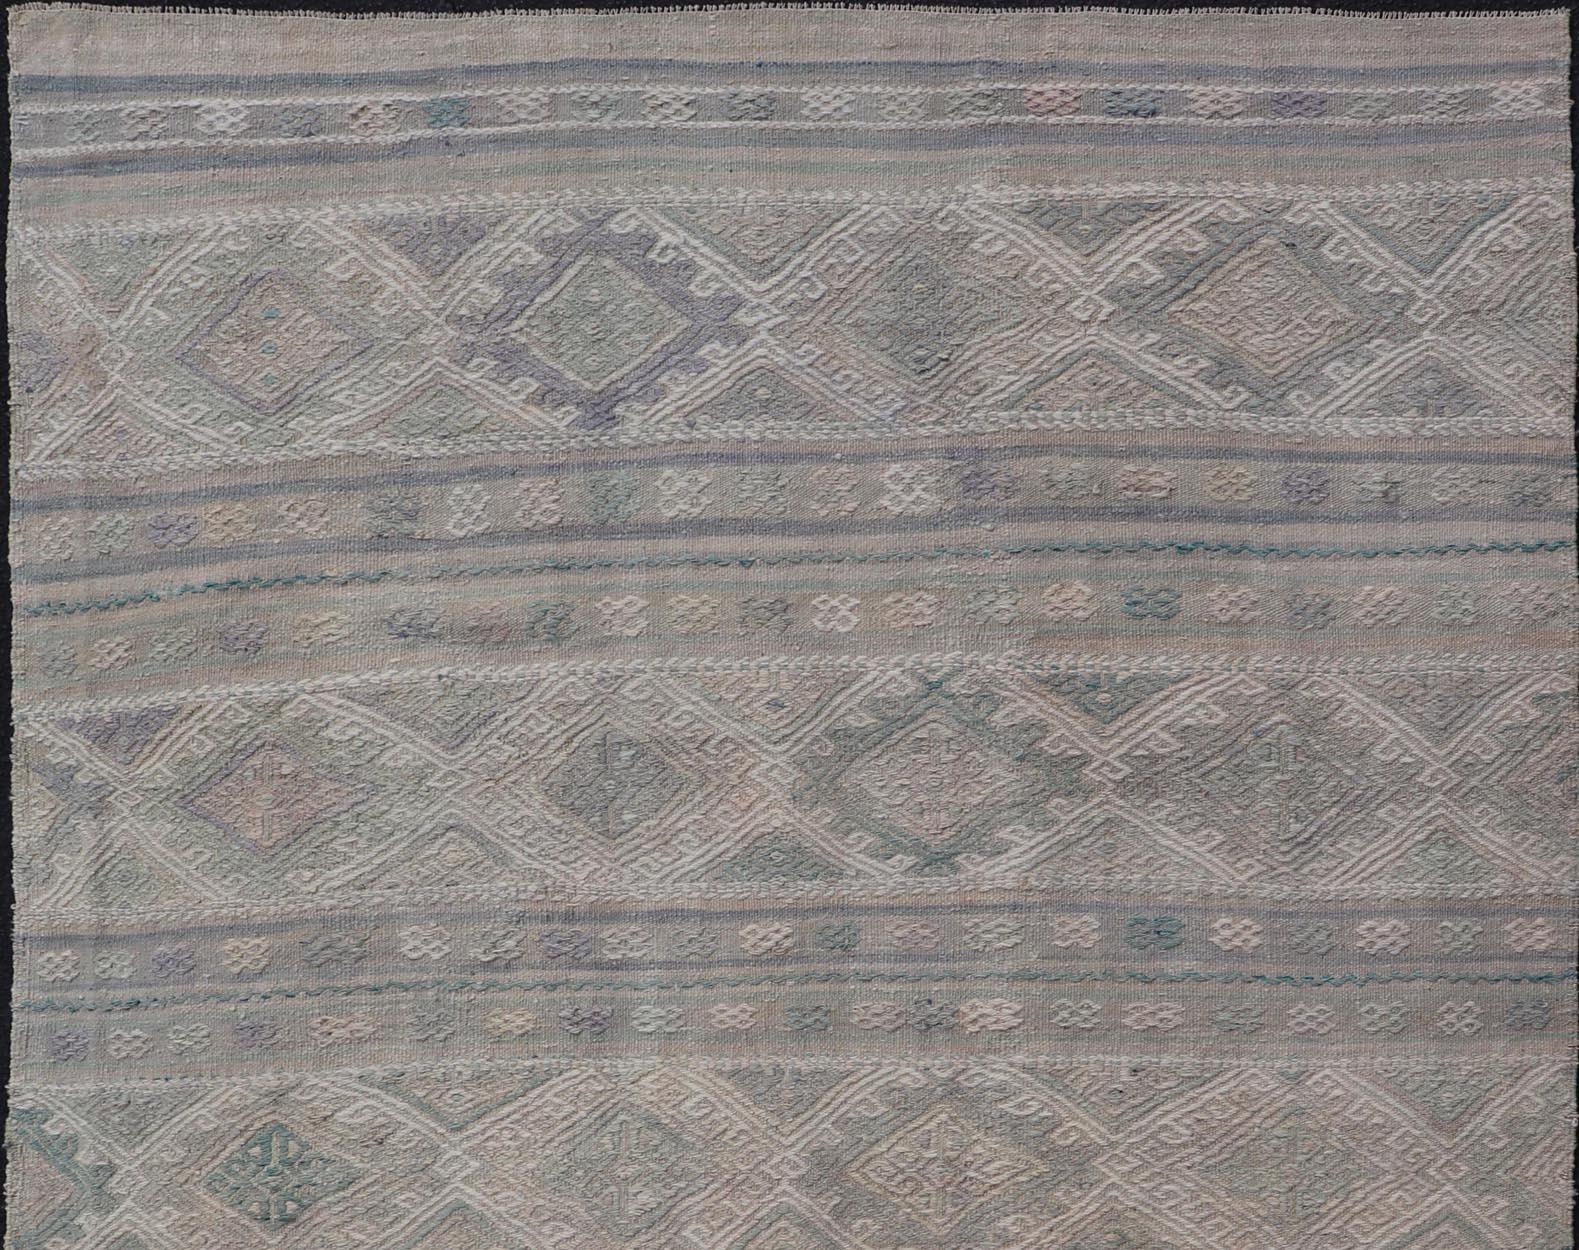 Vintage Turkish Flat-Weave Kilim with Stripes and Embroideries With Gray-Green For Sale 3